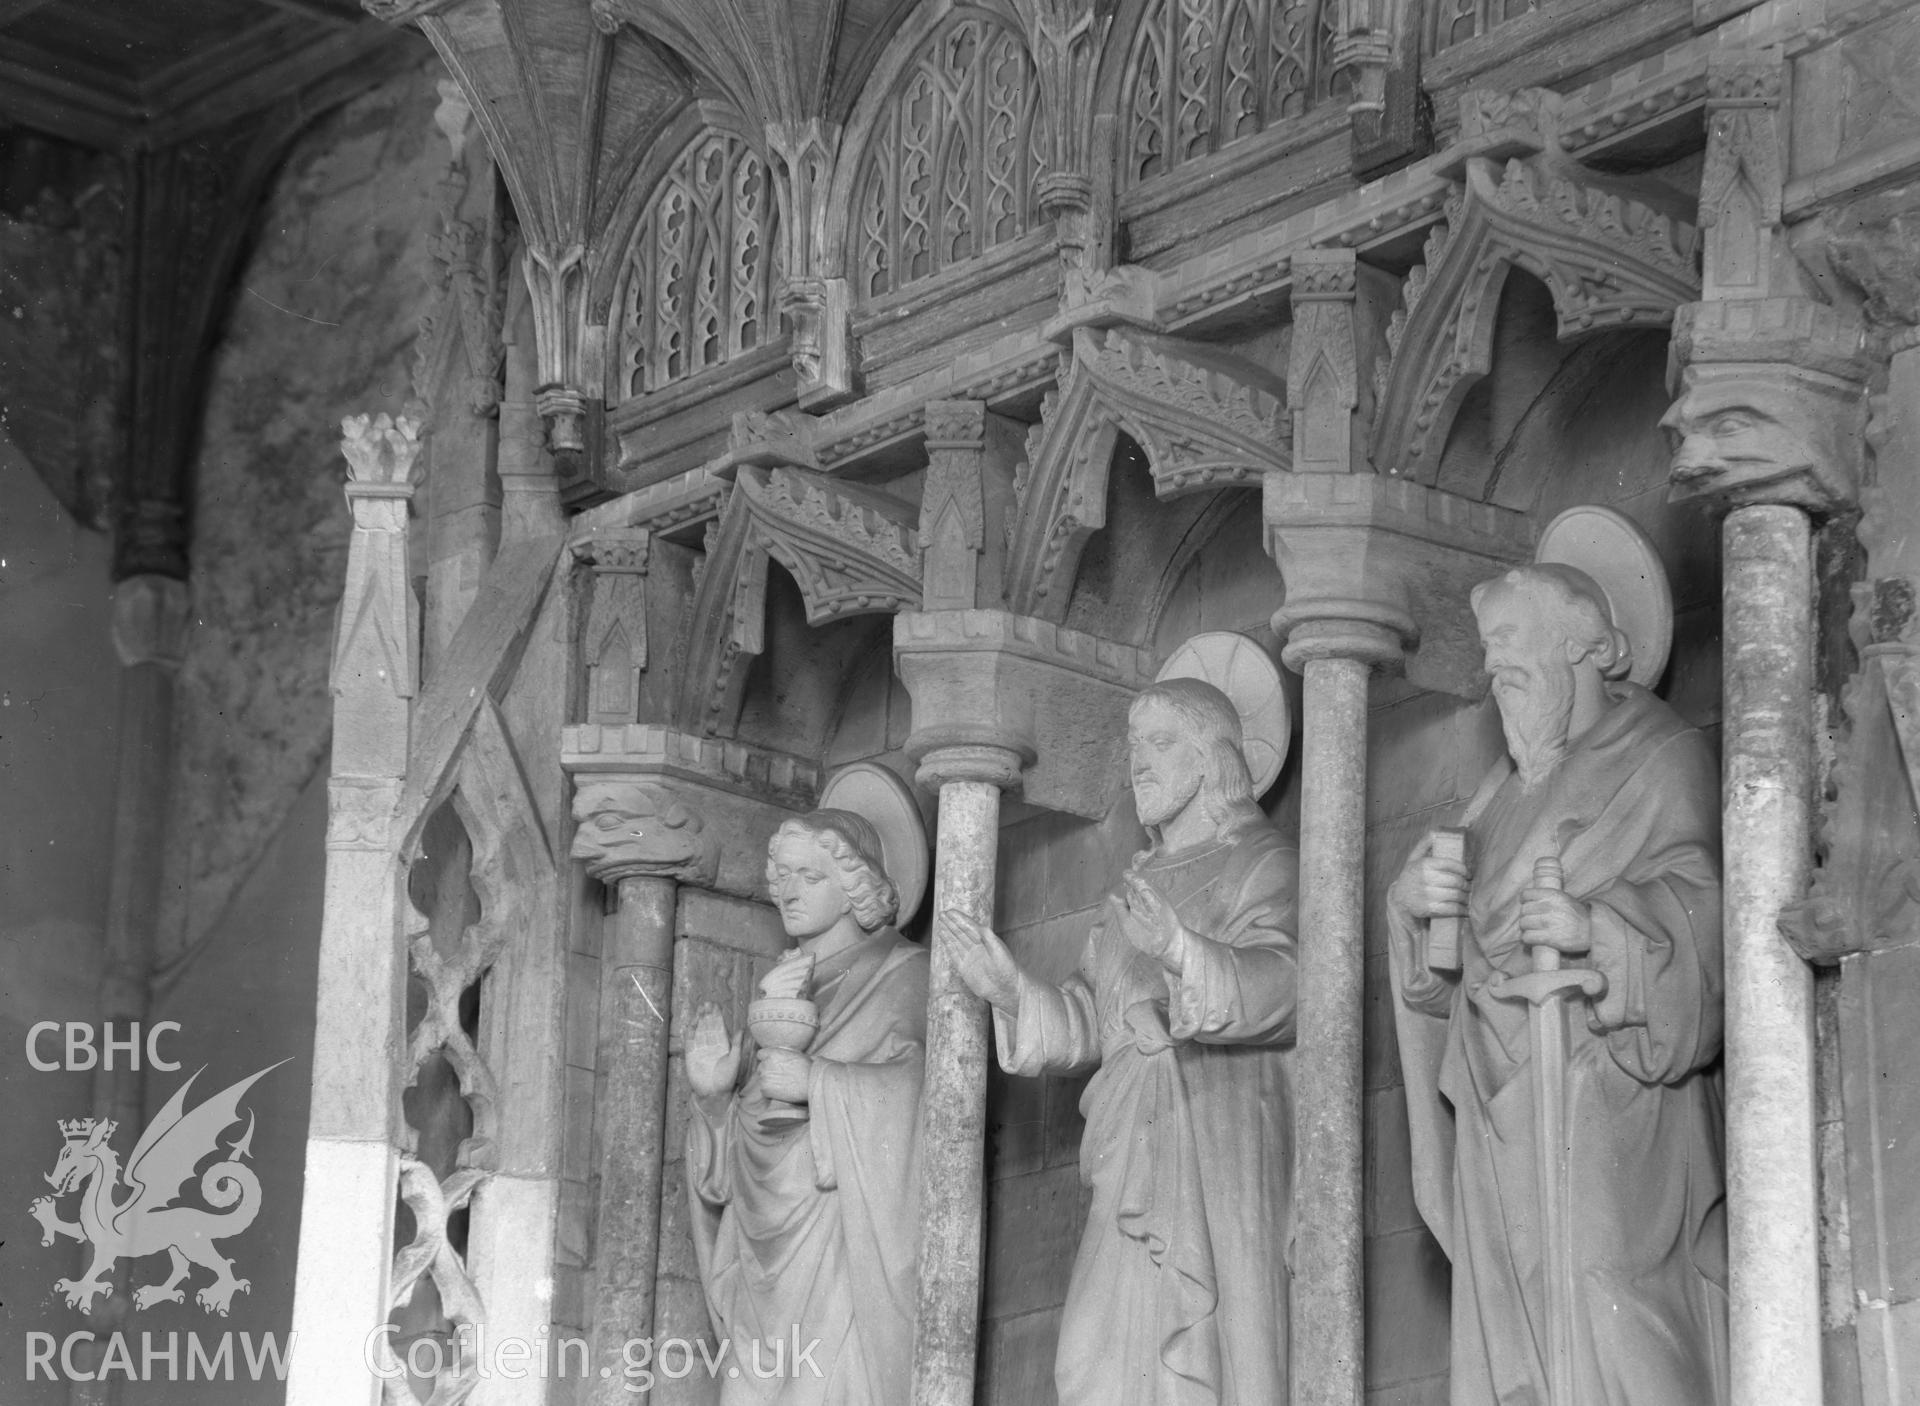 Digital copy of a black and white nitrate negative showing view of Saint's statues at St David's Cathedral, taken by E.W. Lovegrove, July 1936.